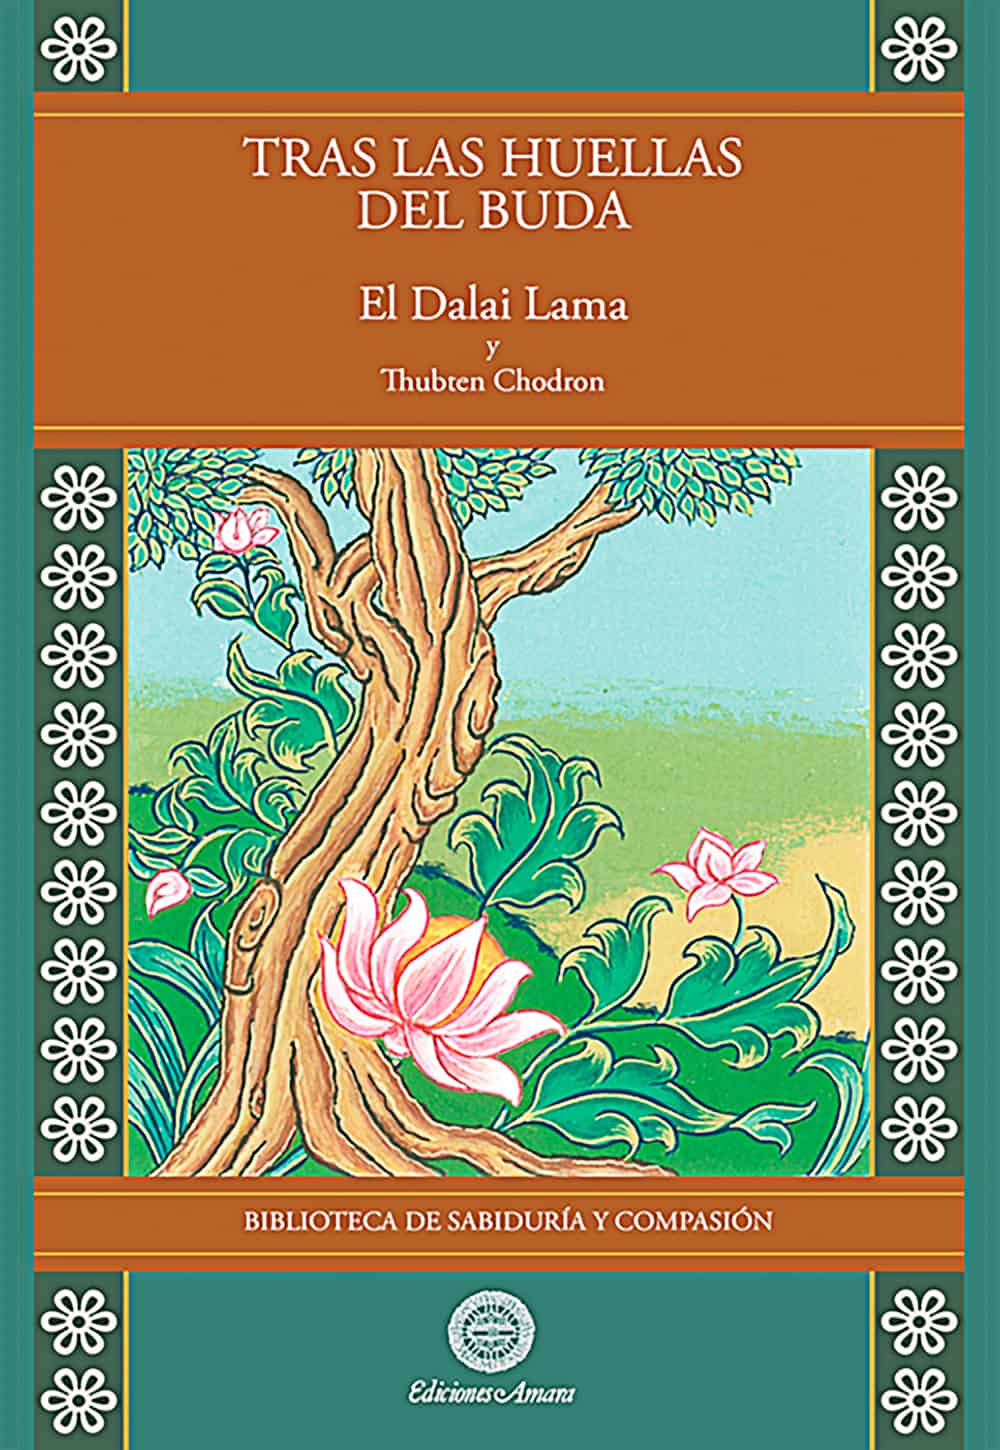 Cover of Spanish translation of Following in the Buddha's Footsteps